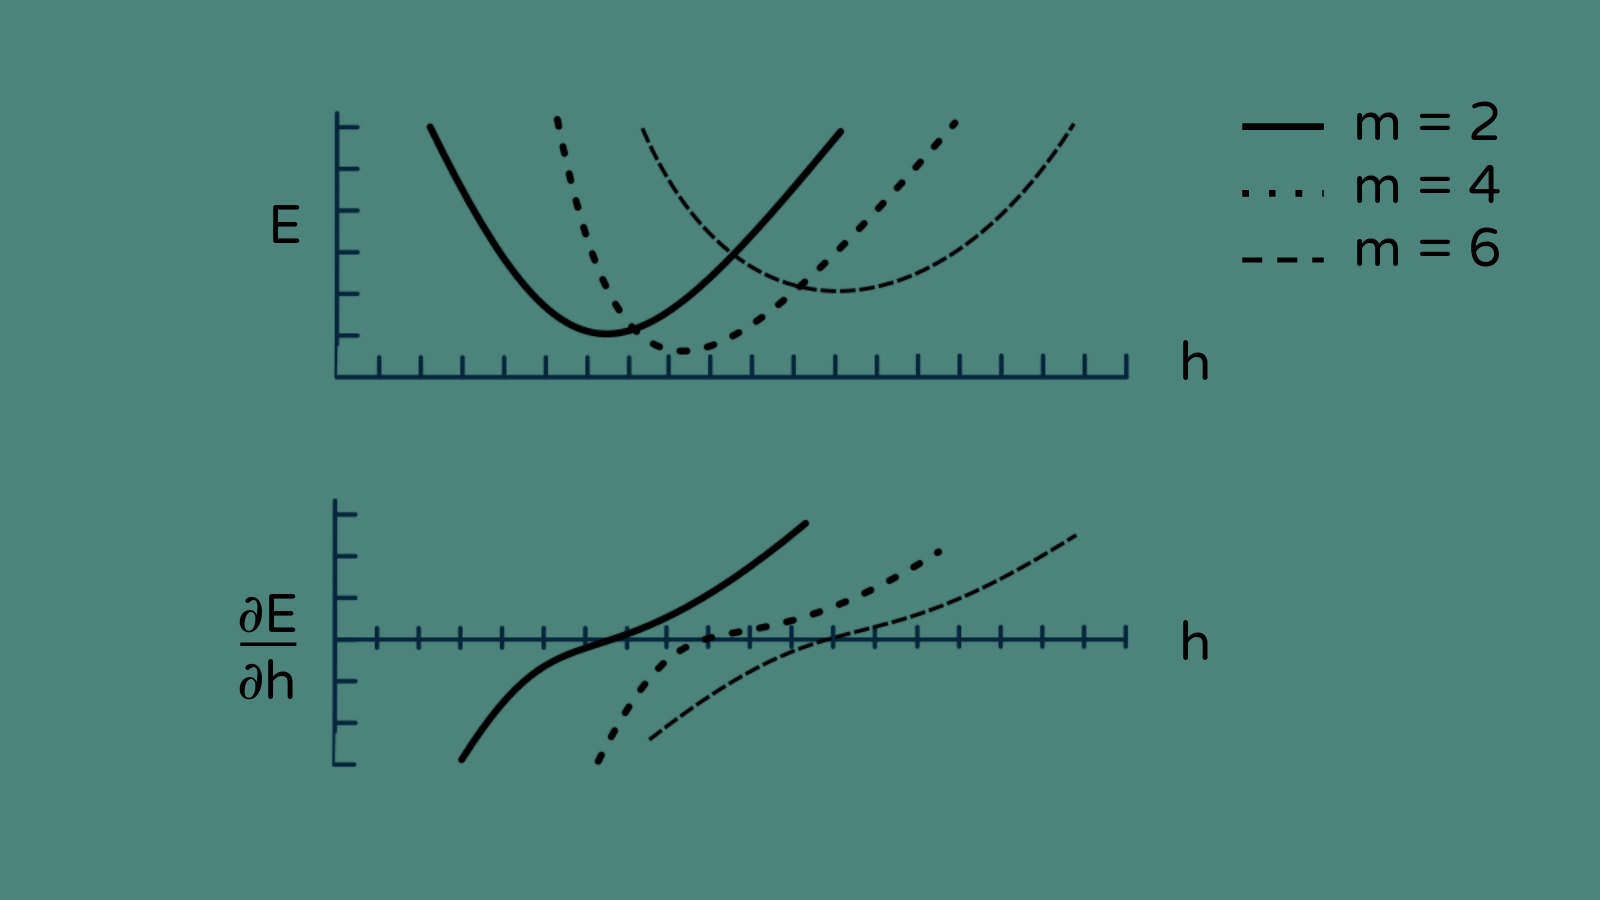 Multiple plots of sensitivity of y to h, shown for different values of m